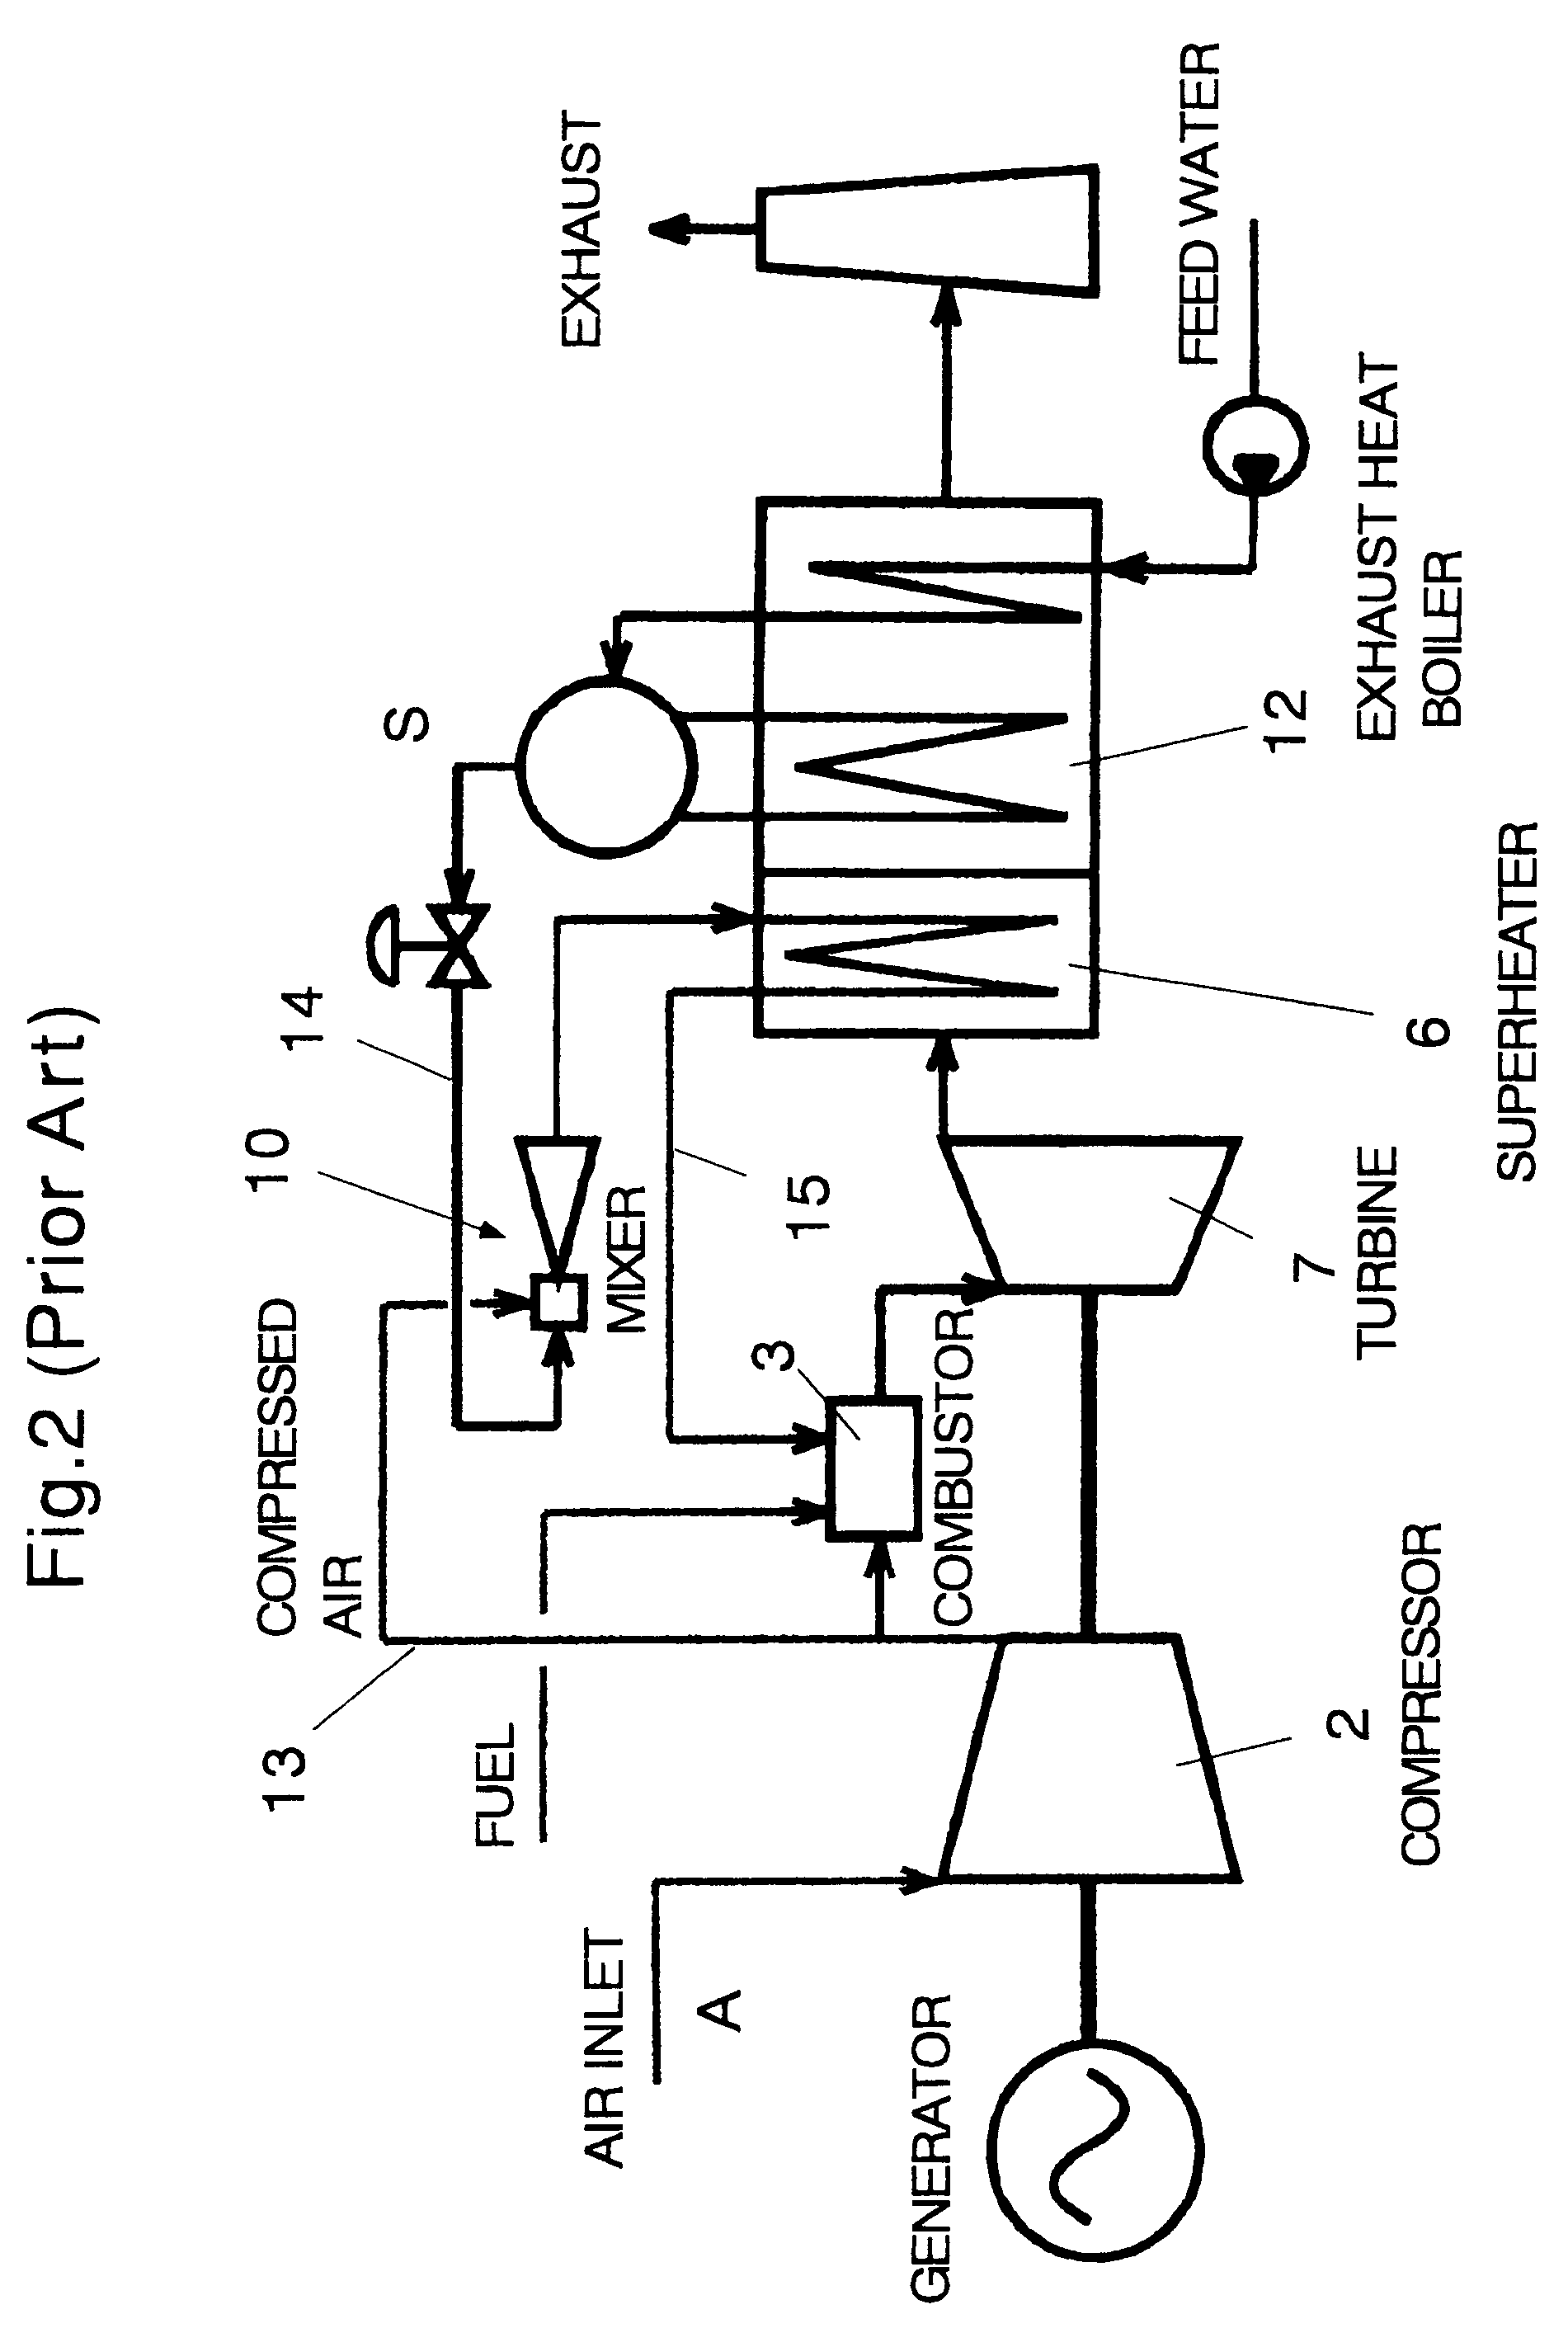 Dual-pressure steam injection partial-regeneration-cycle gas turbine system